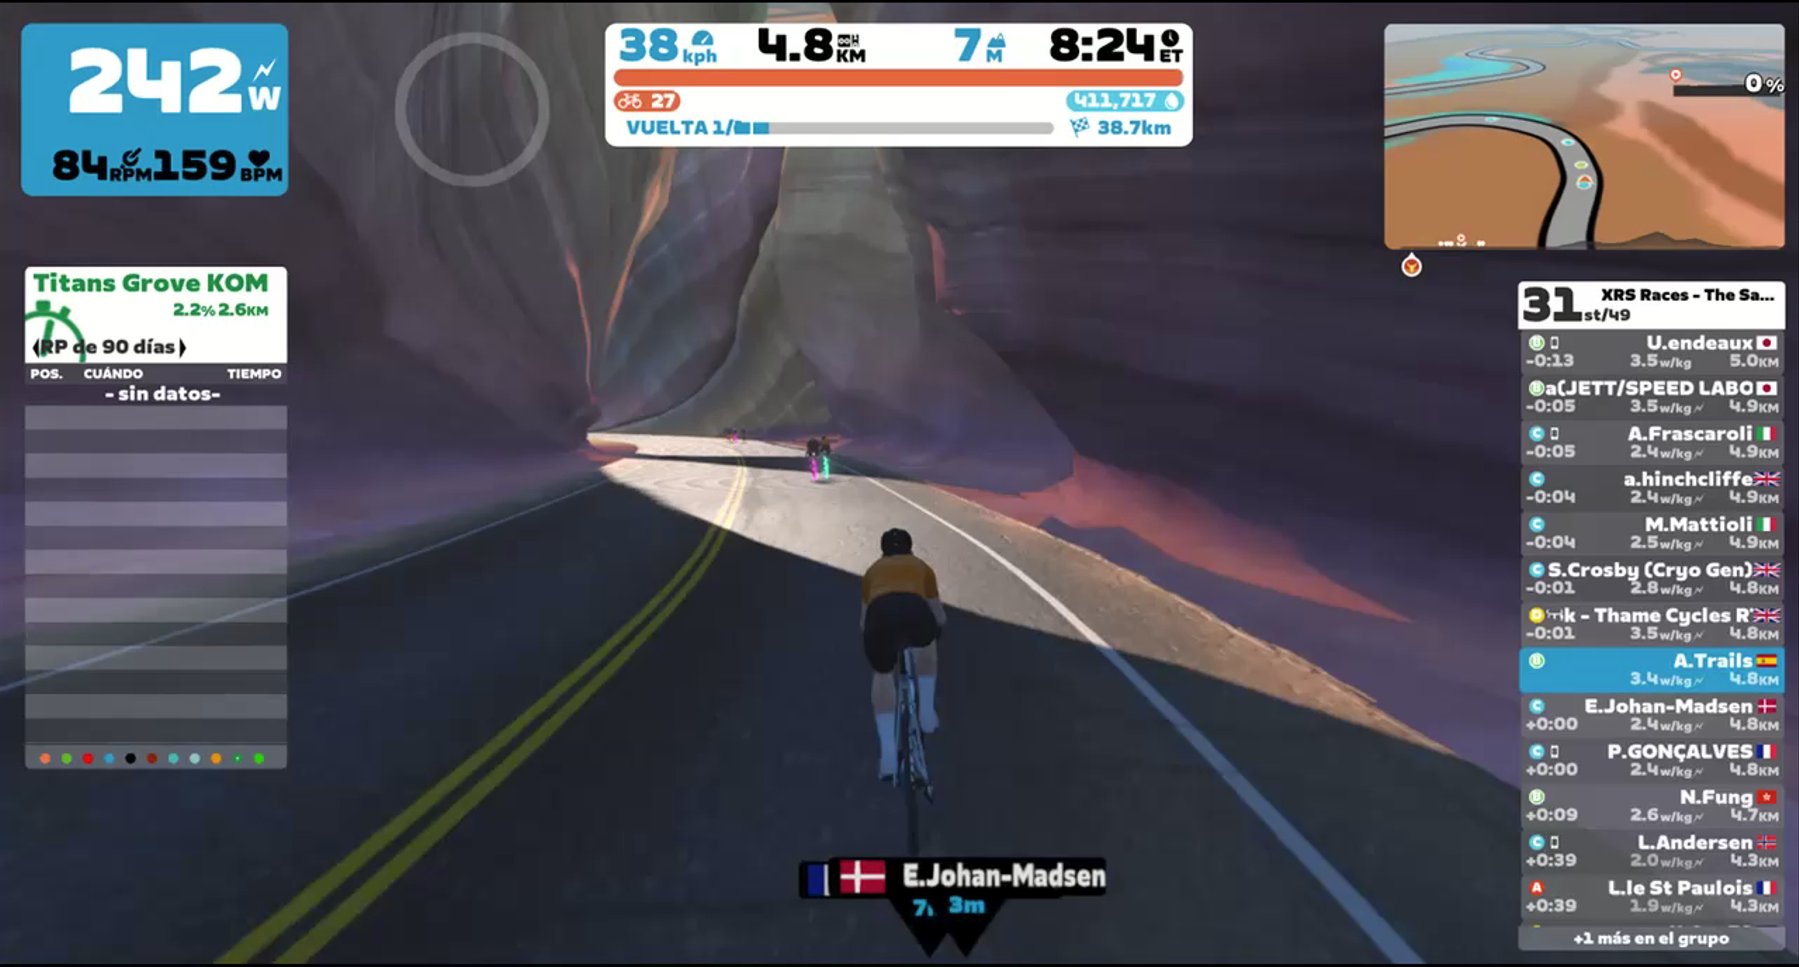 Zwift - Race: XRS Races - The Saturday Classic (B) on Accelerate to Elevate in Watopia